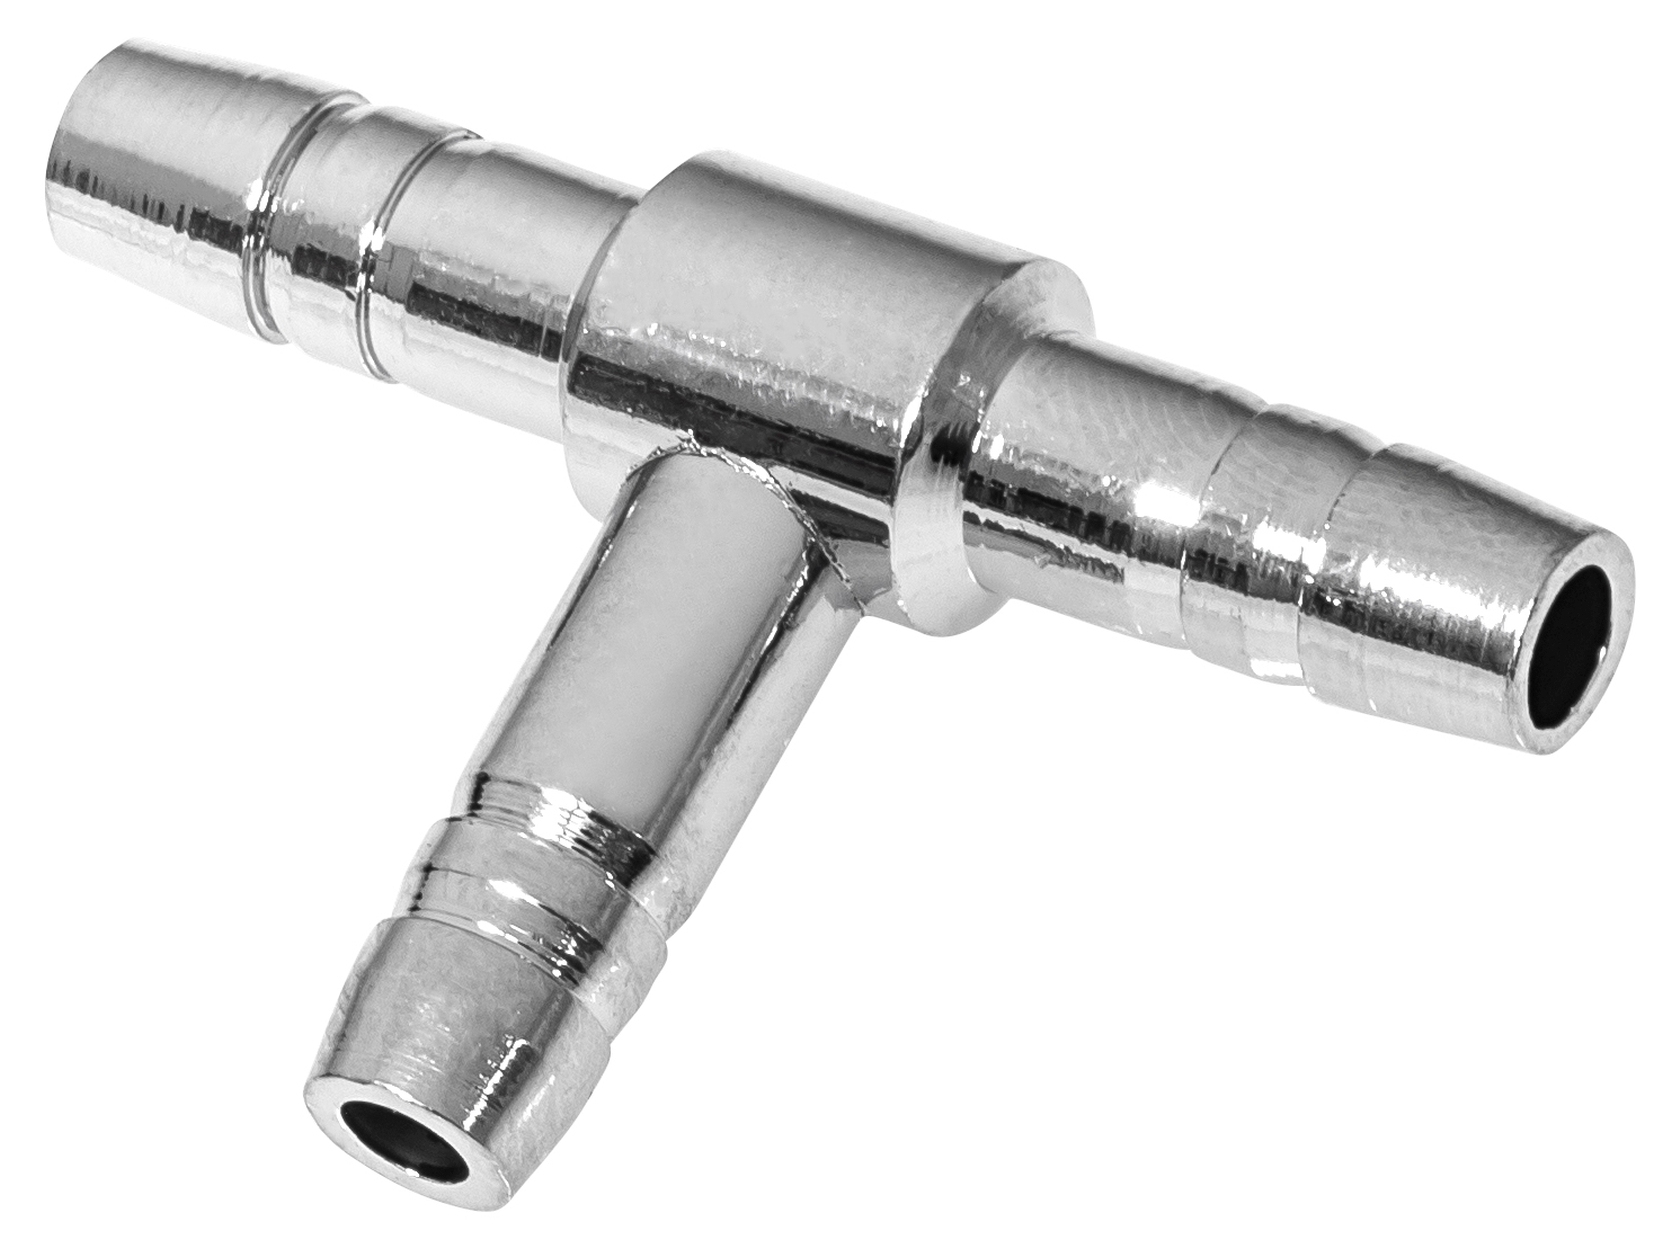 Air Tap, Air Valve & other Accessories for Air Pumps